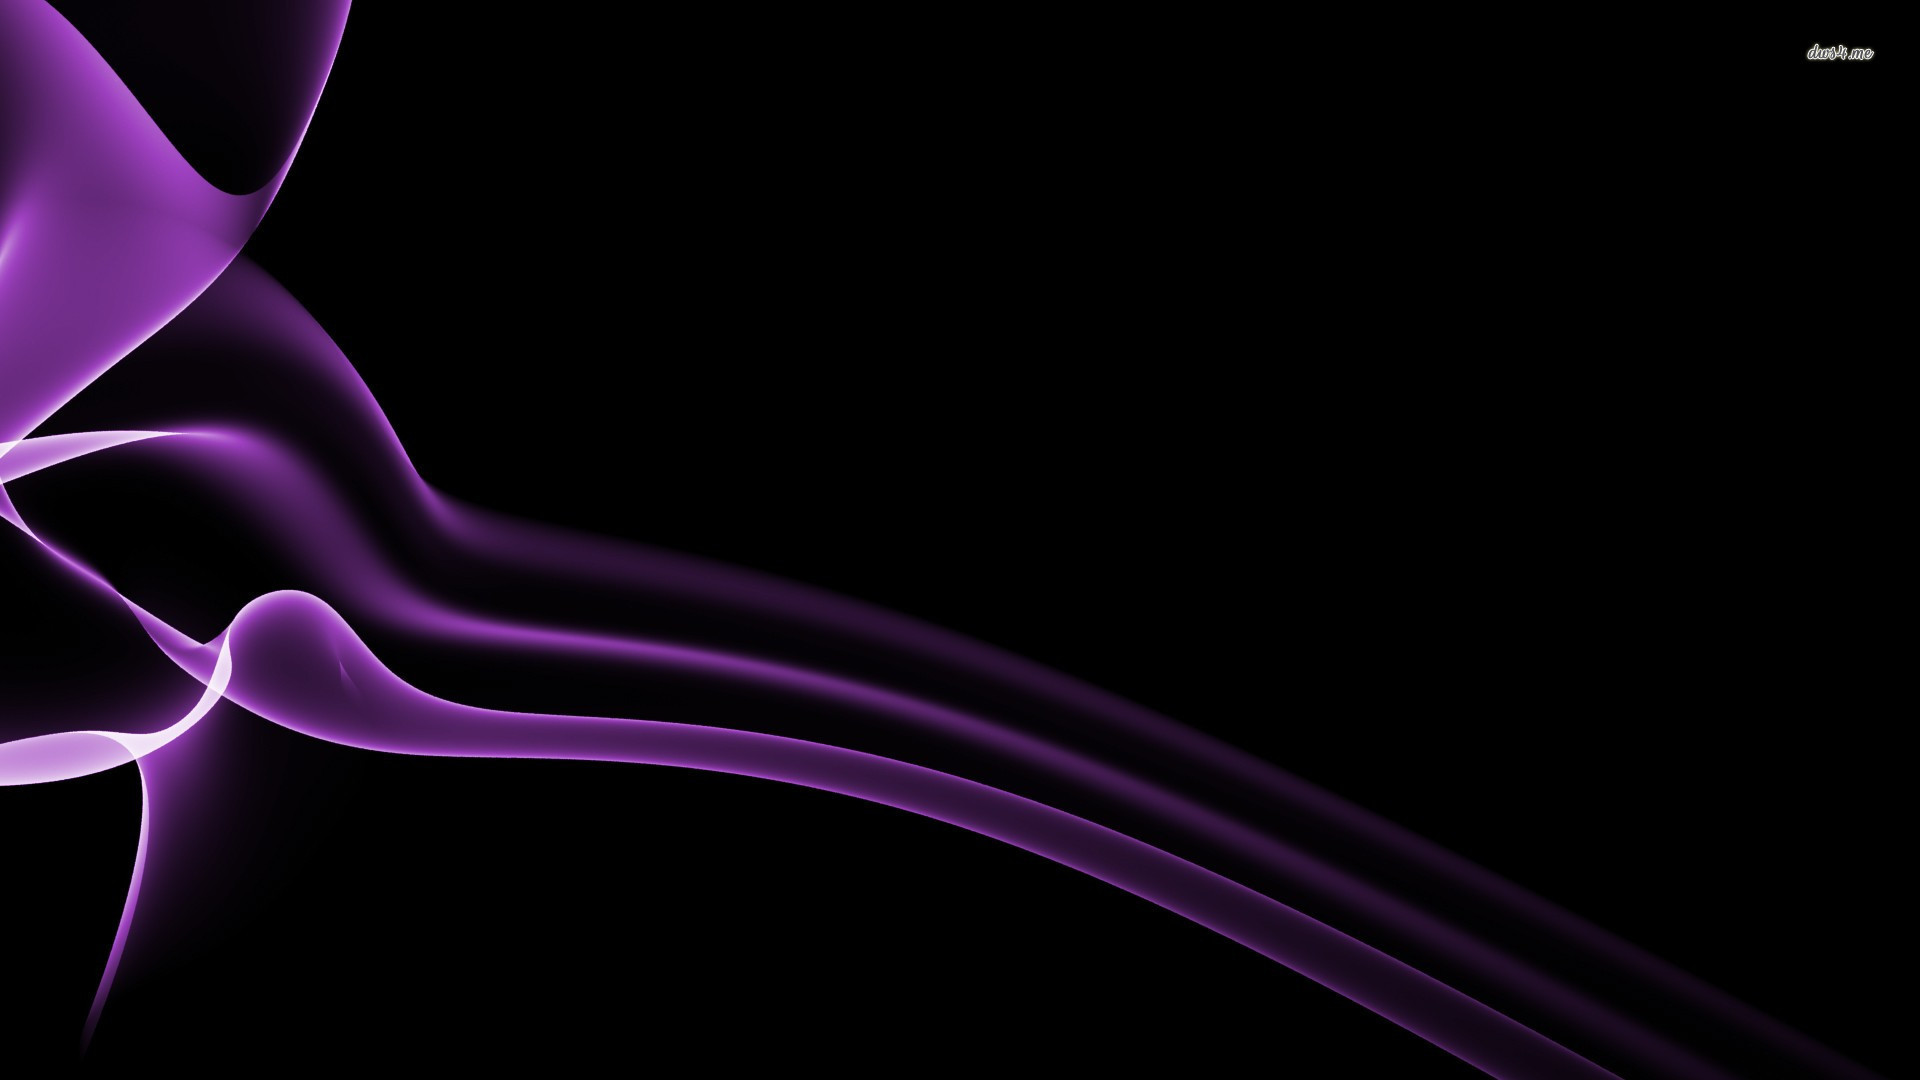 1920x1080 Black and Purple Abstract Wallpaper Tag - Amazing Wallpaperz